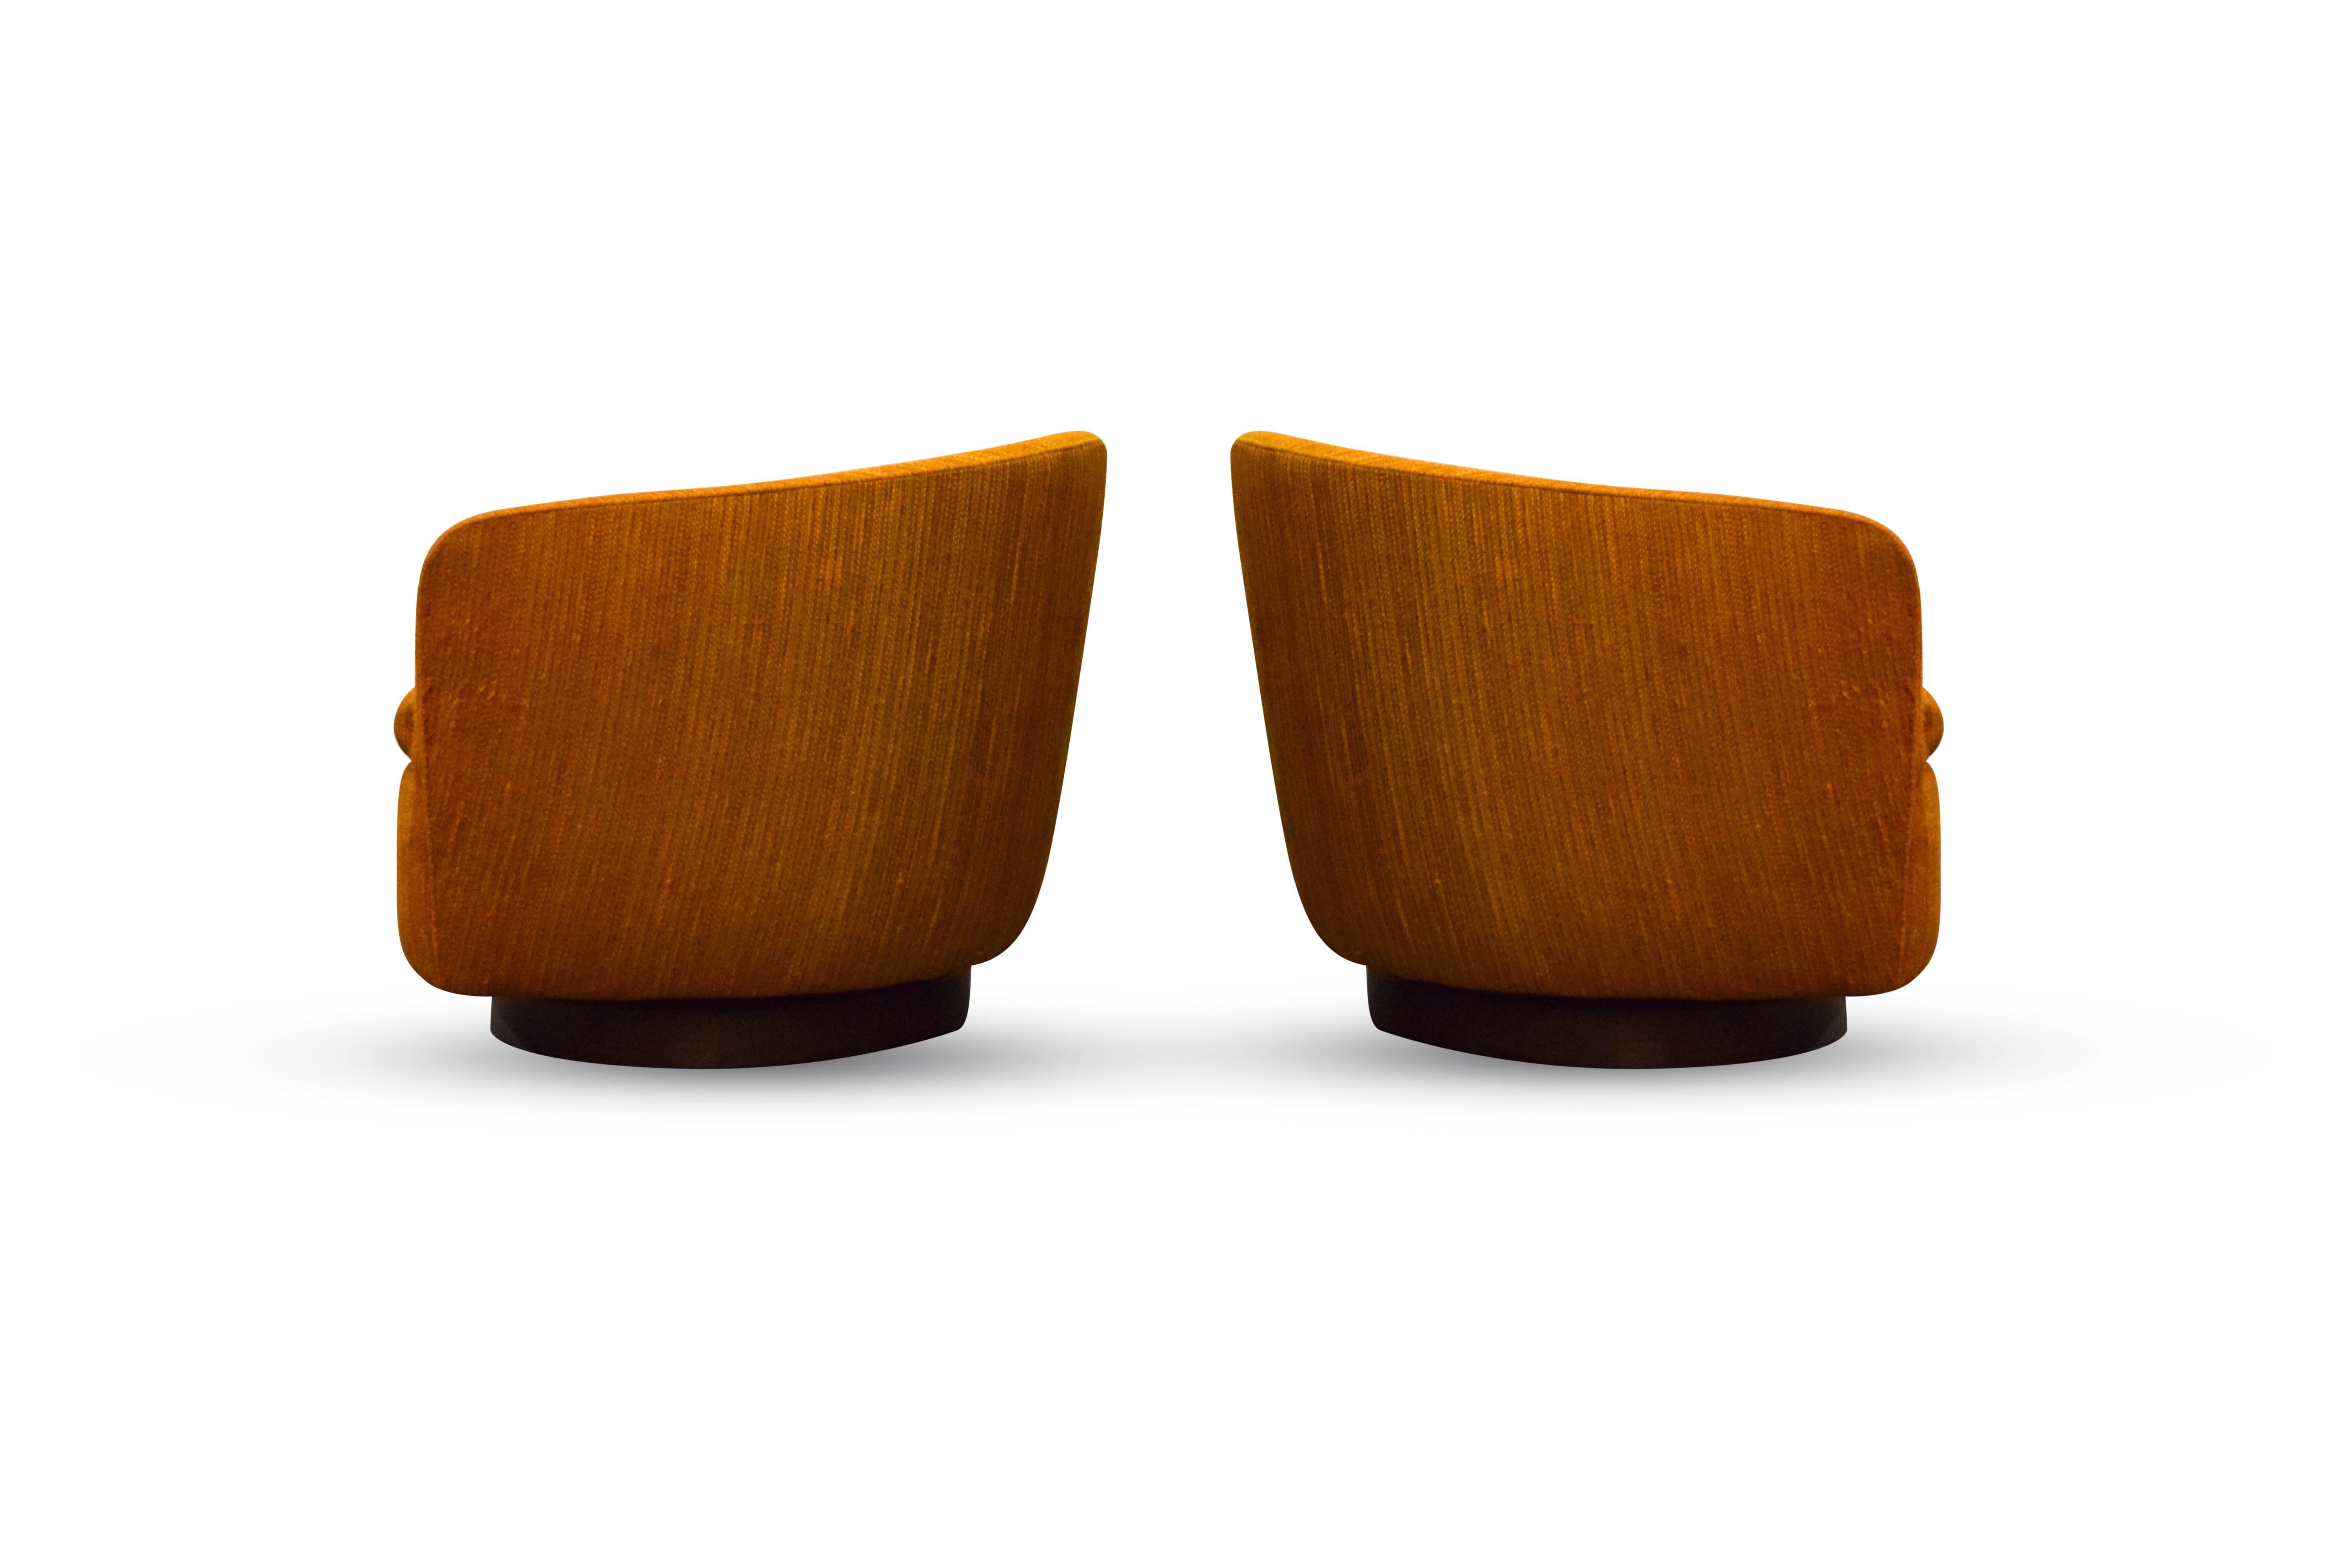 Pair of Milo Baughman for Thayer Coggin swivel lounge chairs.
Chairs swivel and tilt.